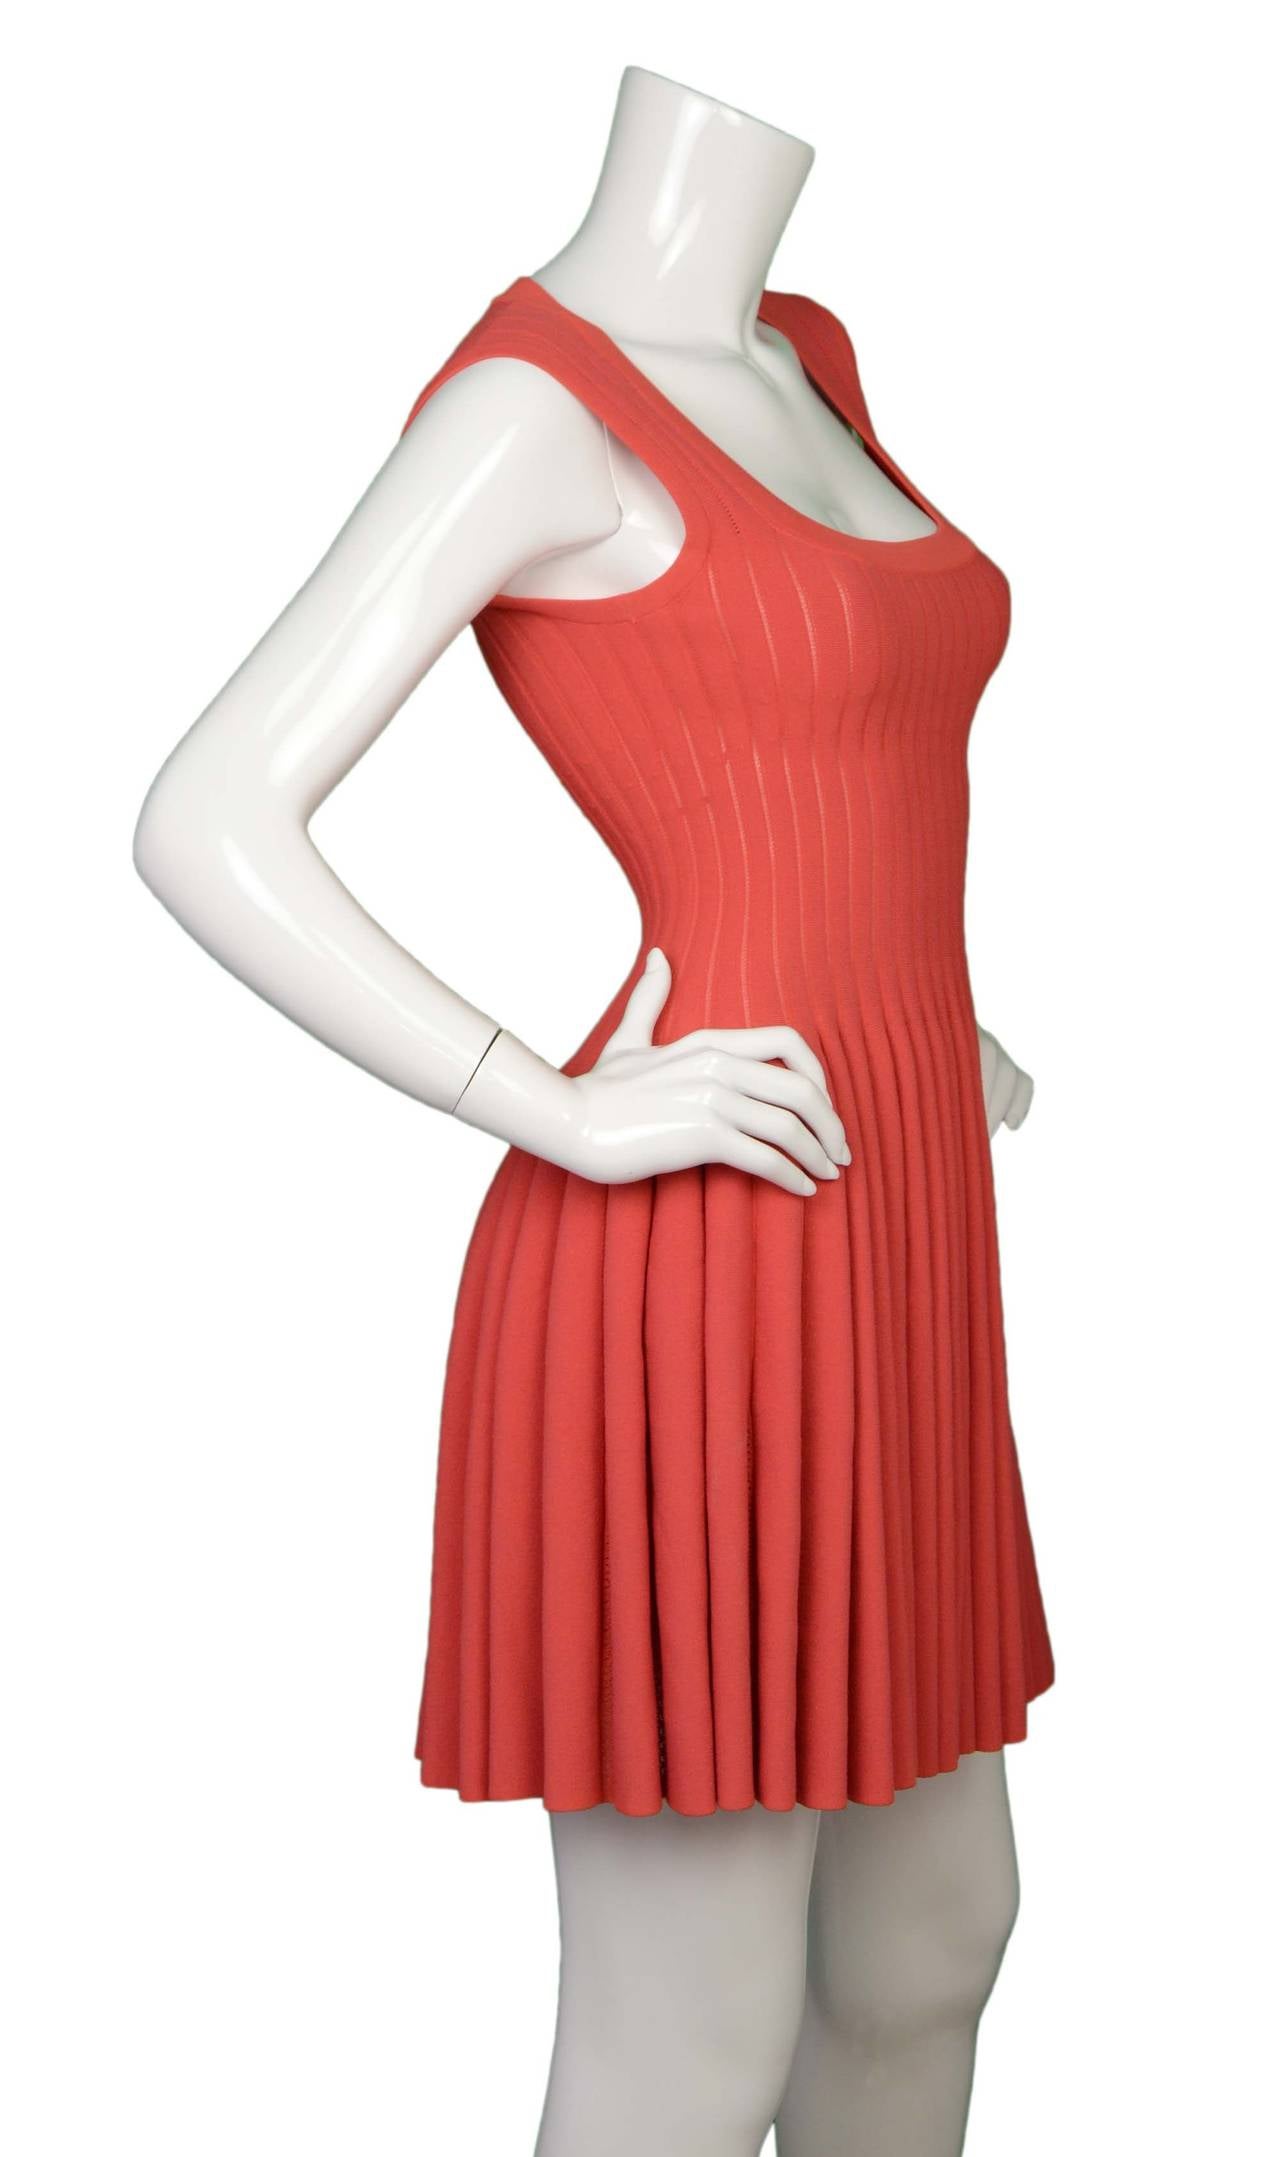 Alaia Coral Sleeveless Ribbed Fit Flare Dress
Made in: Italy
Color: Coral
Composition: 82% viscose, 10% polyester, 6% nylon, 2% elastane
Lining: None
Closure/opening: Back center zipper
Exterior Pockets: None
Interior Pockets: None
Overall